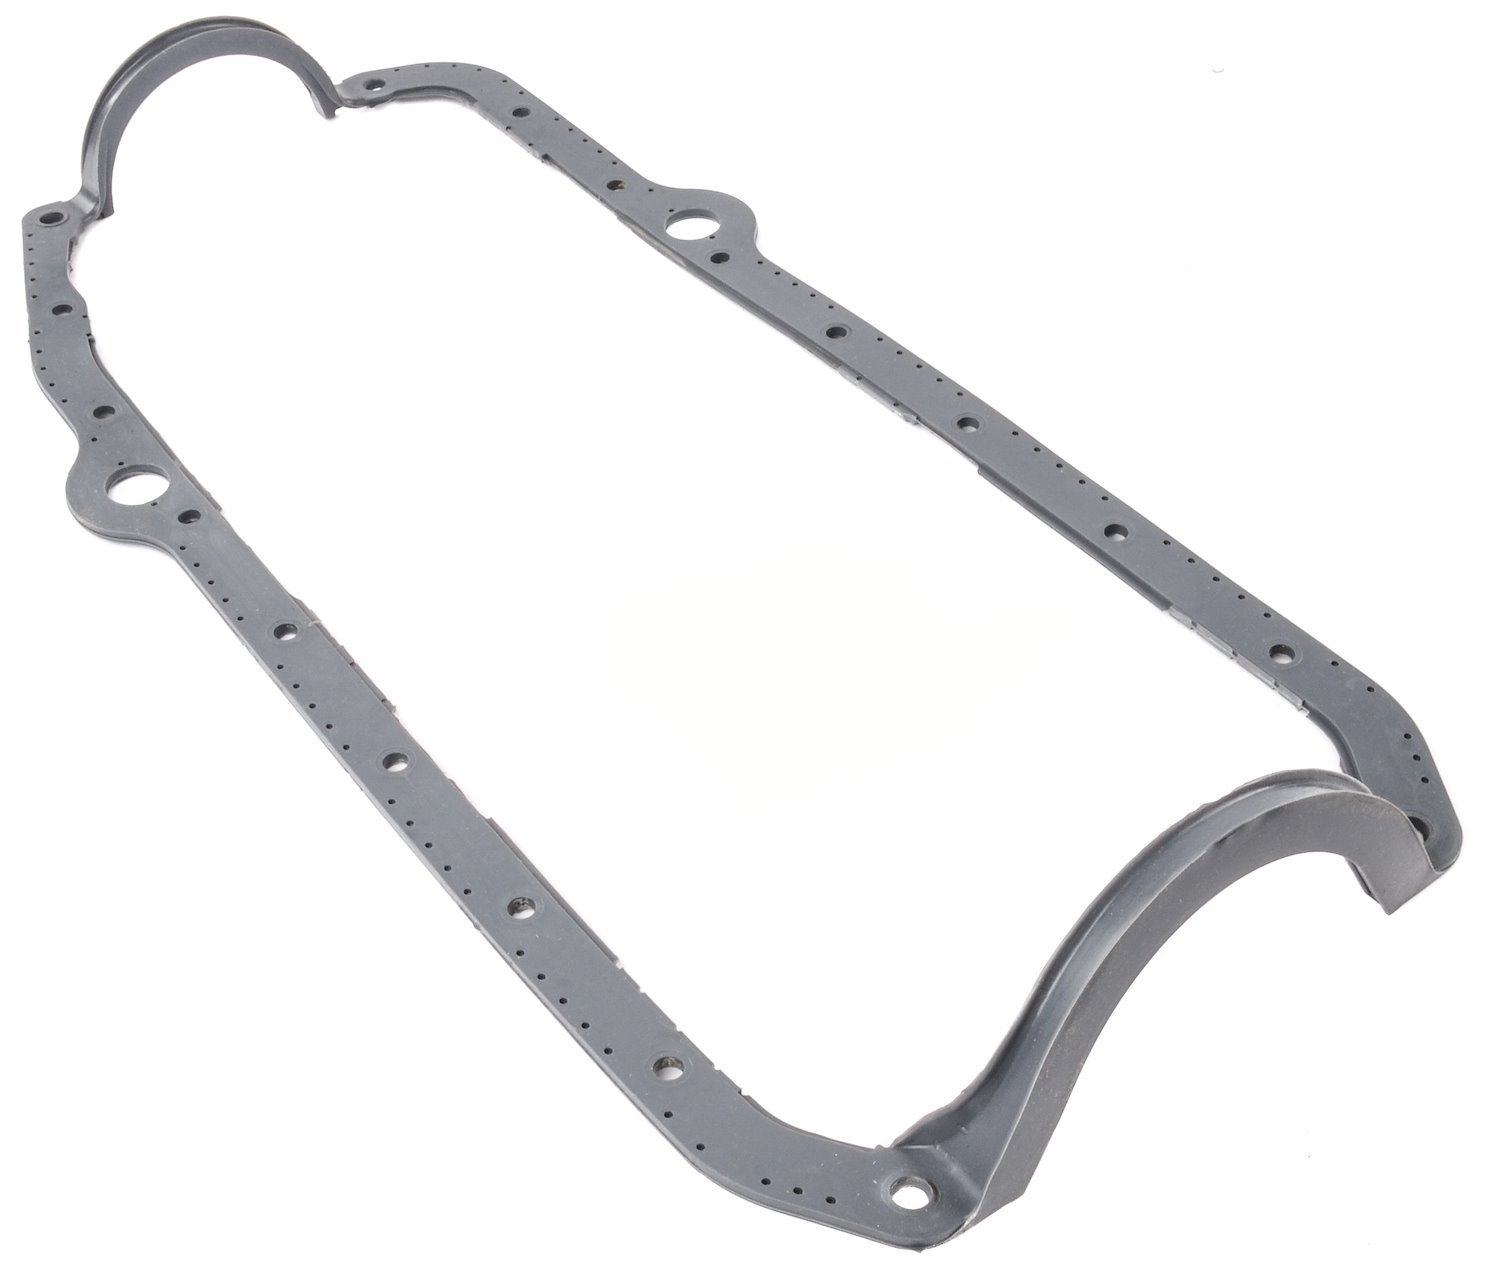 One-Piece Oil Pan Gasket for 1975-1985 Small Block Chevy V8